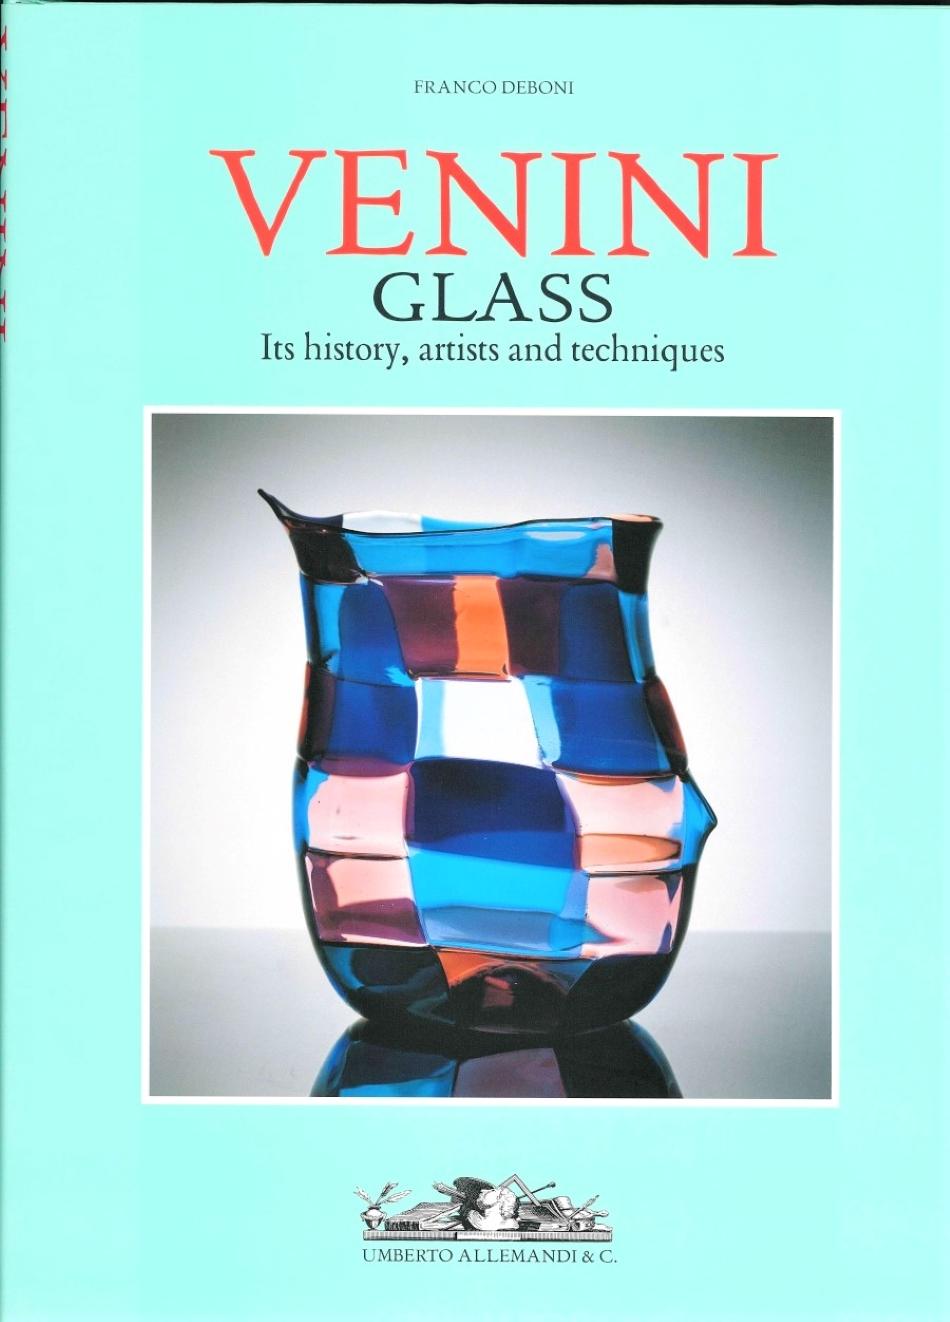 This two-volume set of books is the much-awaited 2007 reprint, which has now been enlarged to include a section on lighting, a directory of some of the major artists who worked for Venini, the Red Catalogue, the Green Catalogue and the extended Blue